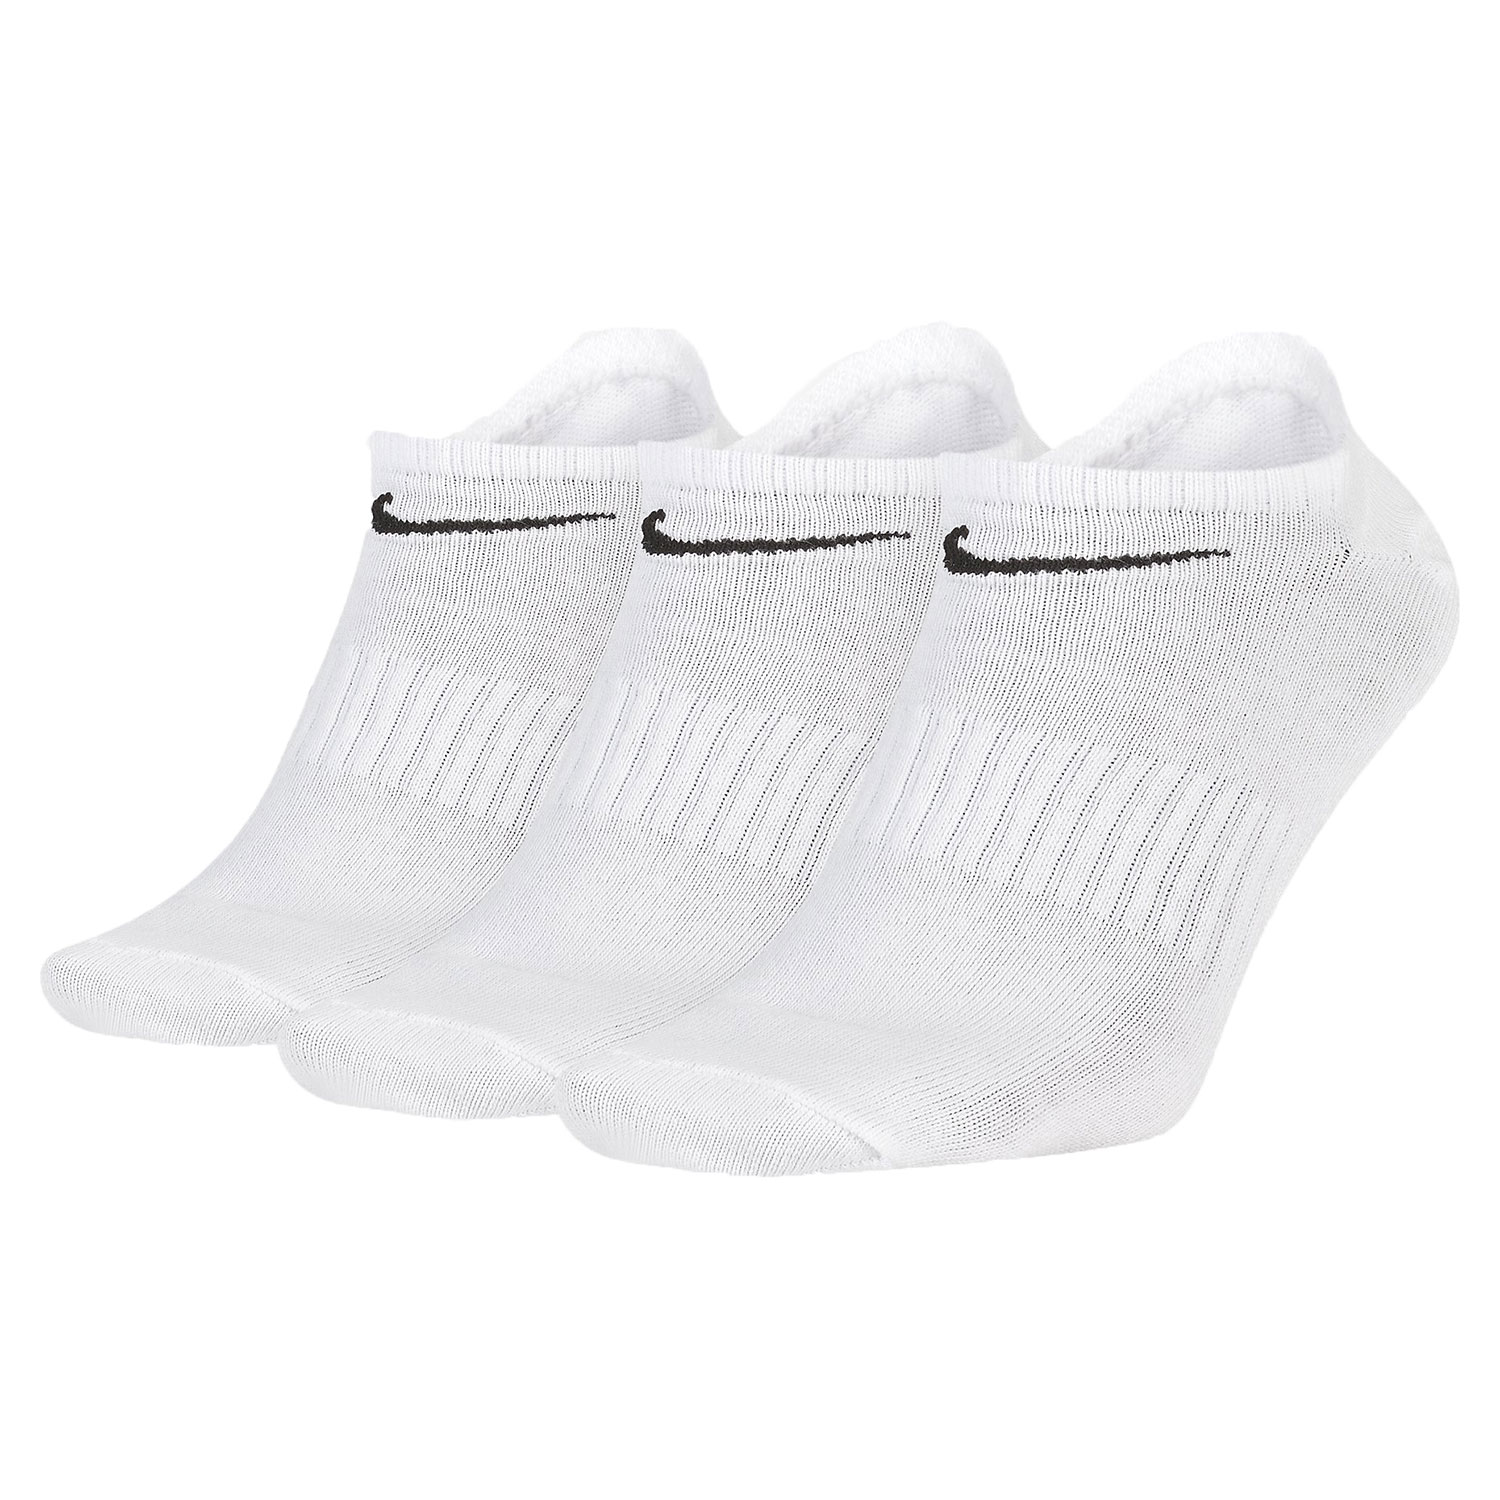 Nike Everyday Lightweight x 3 Calcetines - White